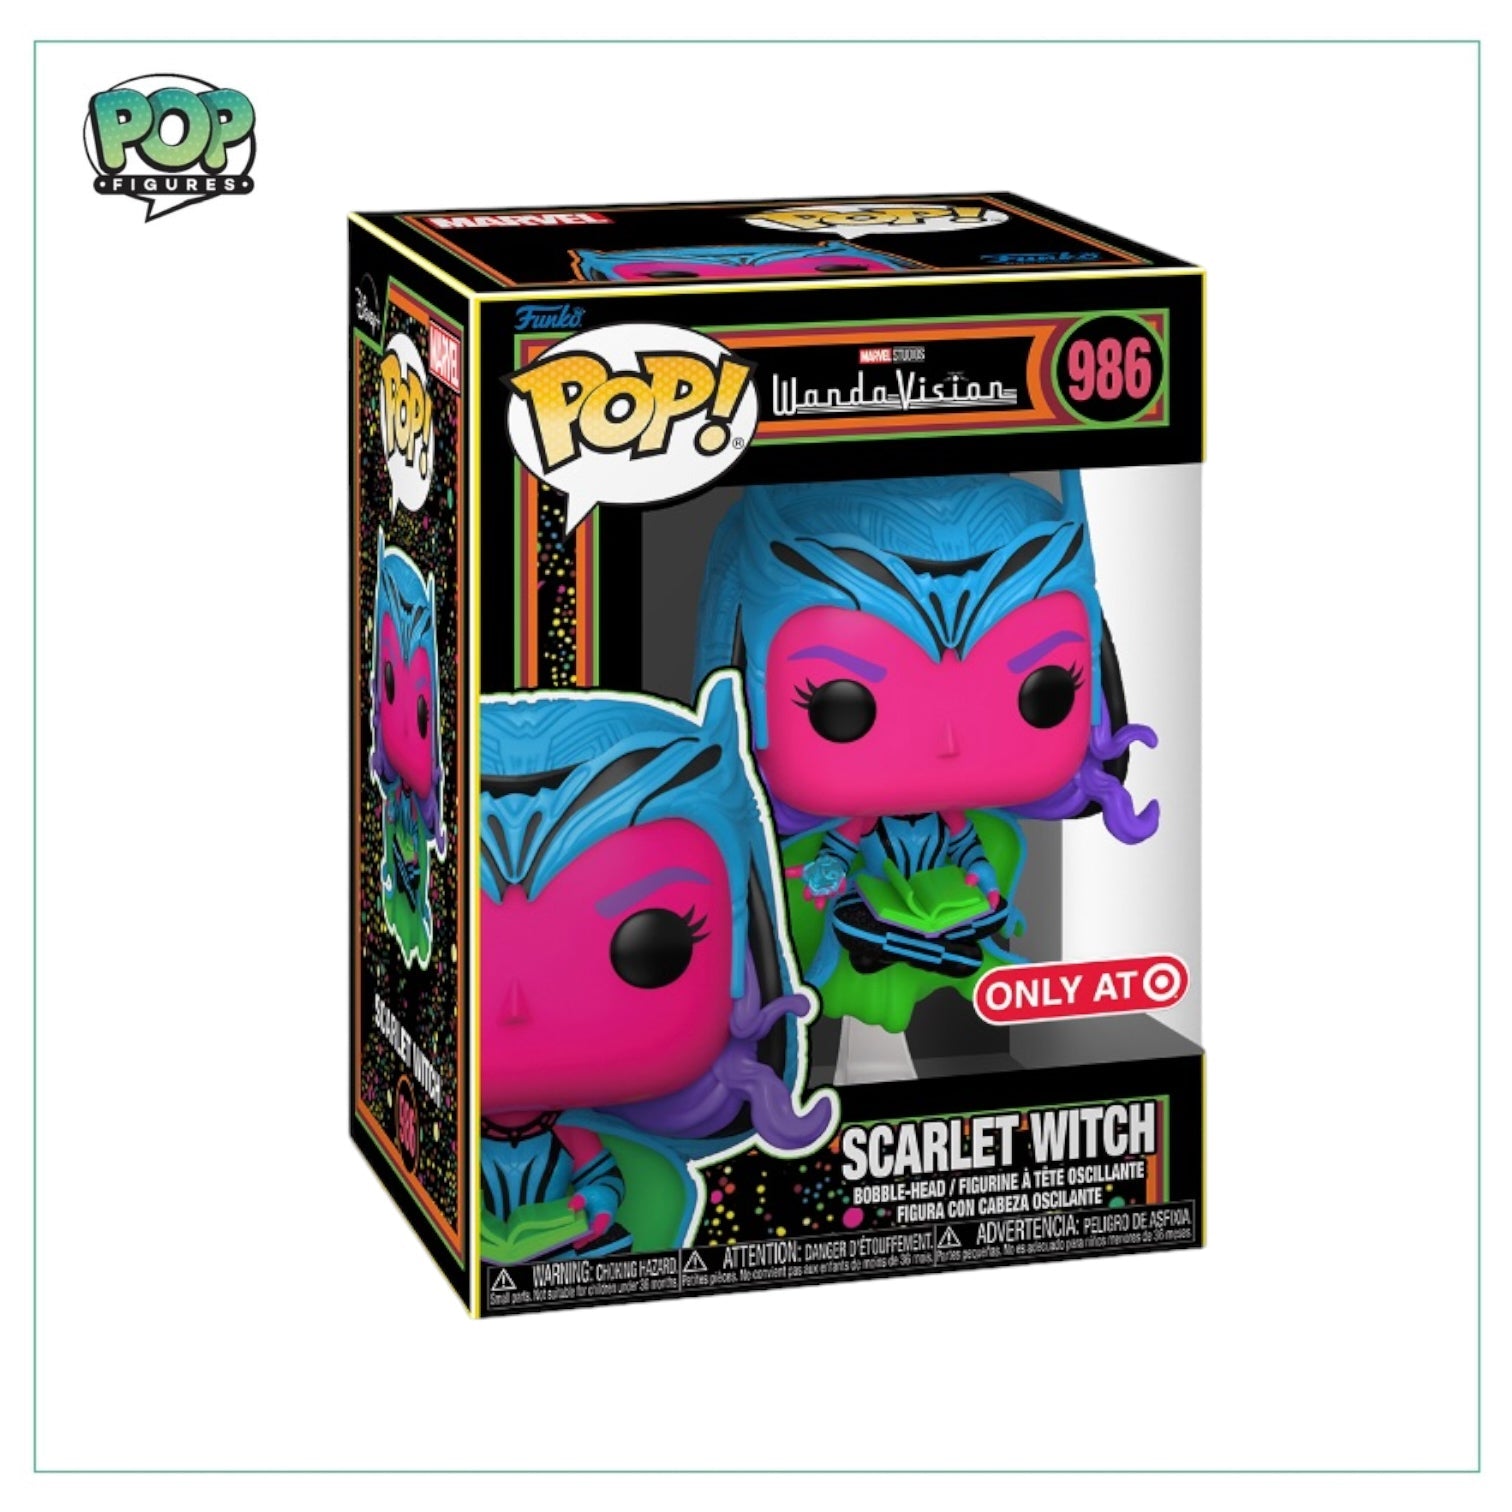 Scarlet Witch #986 Funko Pop! - Wanda Vision - Target - Angry Cat